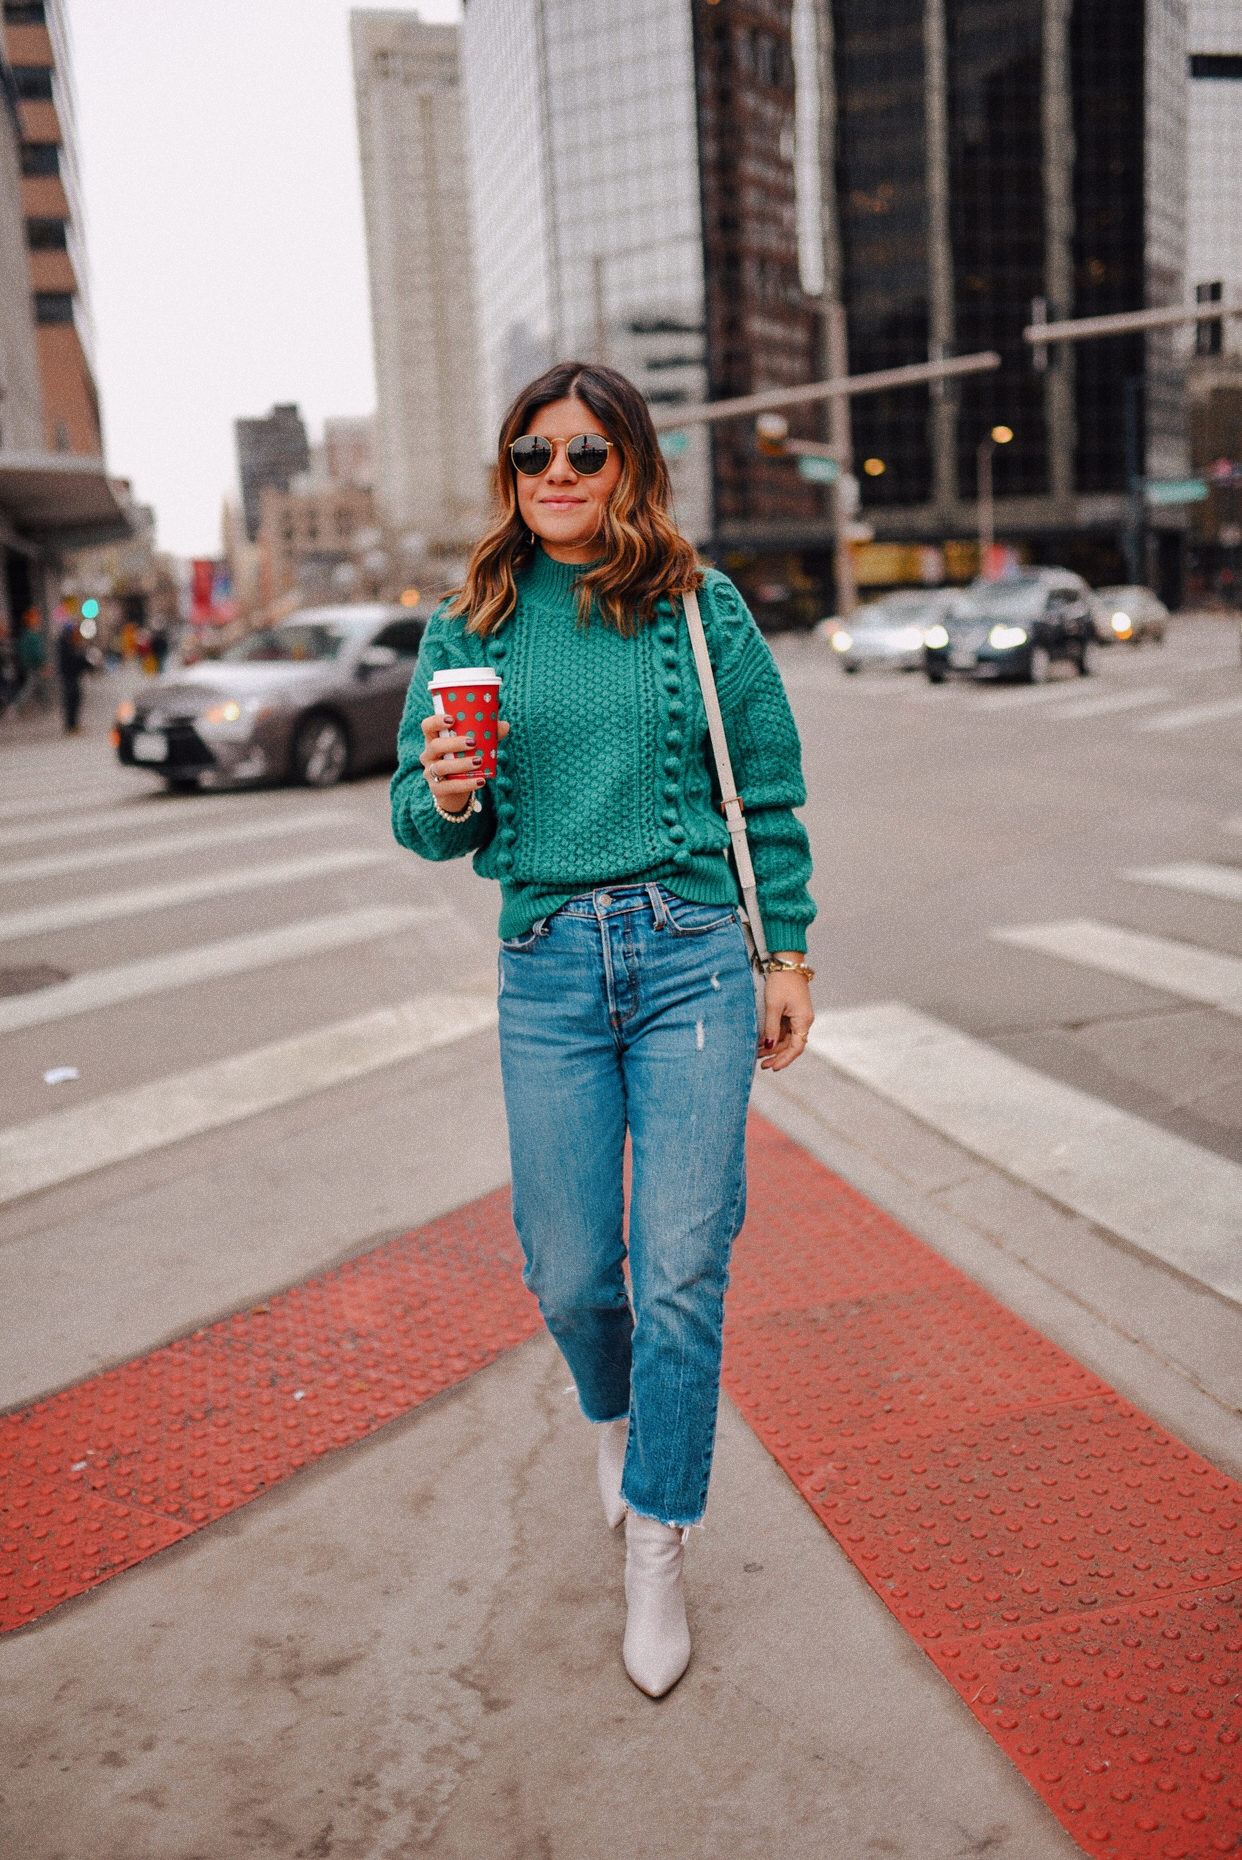 Carolina Hellal of Chic Talk wearing a Sezane green knit sweater, Levi's wedgie jeans, Marc Fisher gray ankle boots and Kate Spade white bag. 